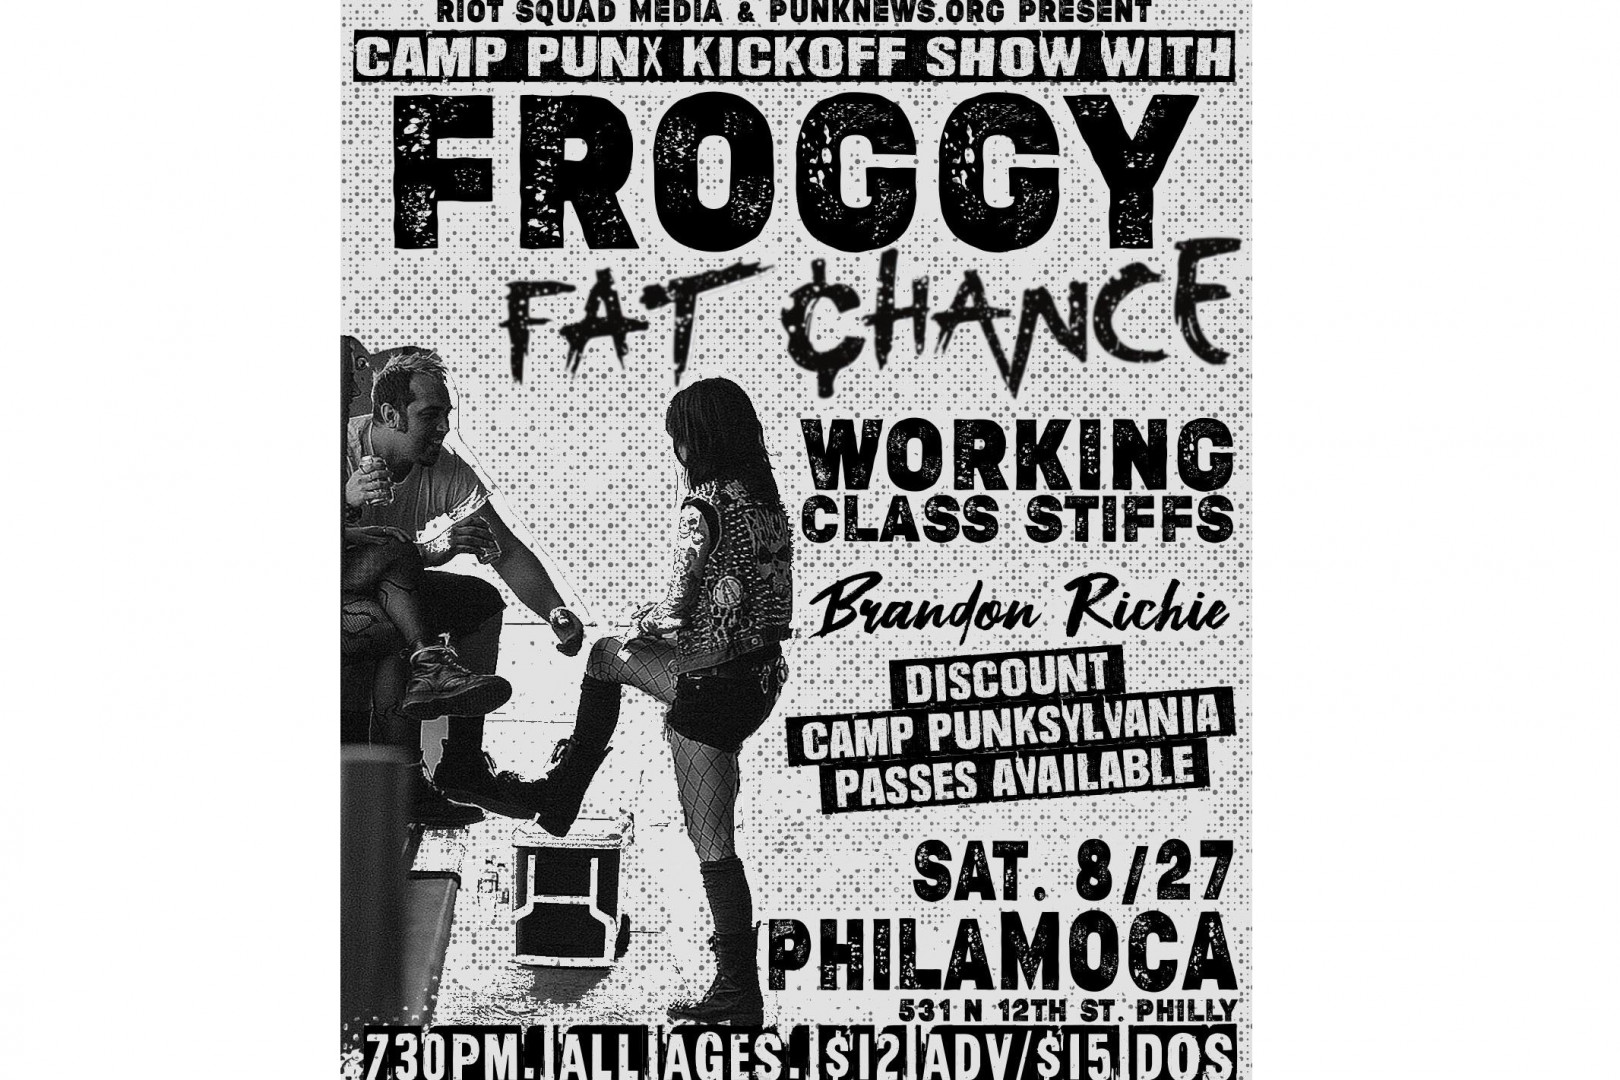 Camp Punksylvania Kickoff show with Froggy this Saturday in Philly!